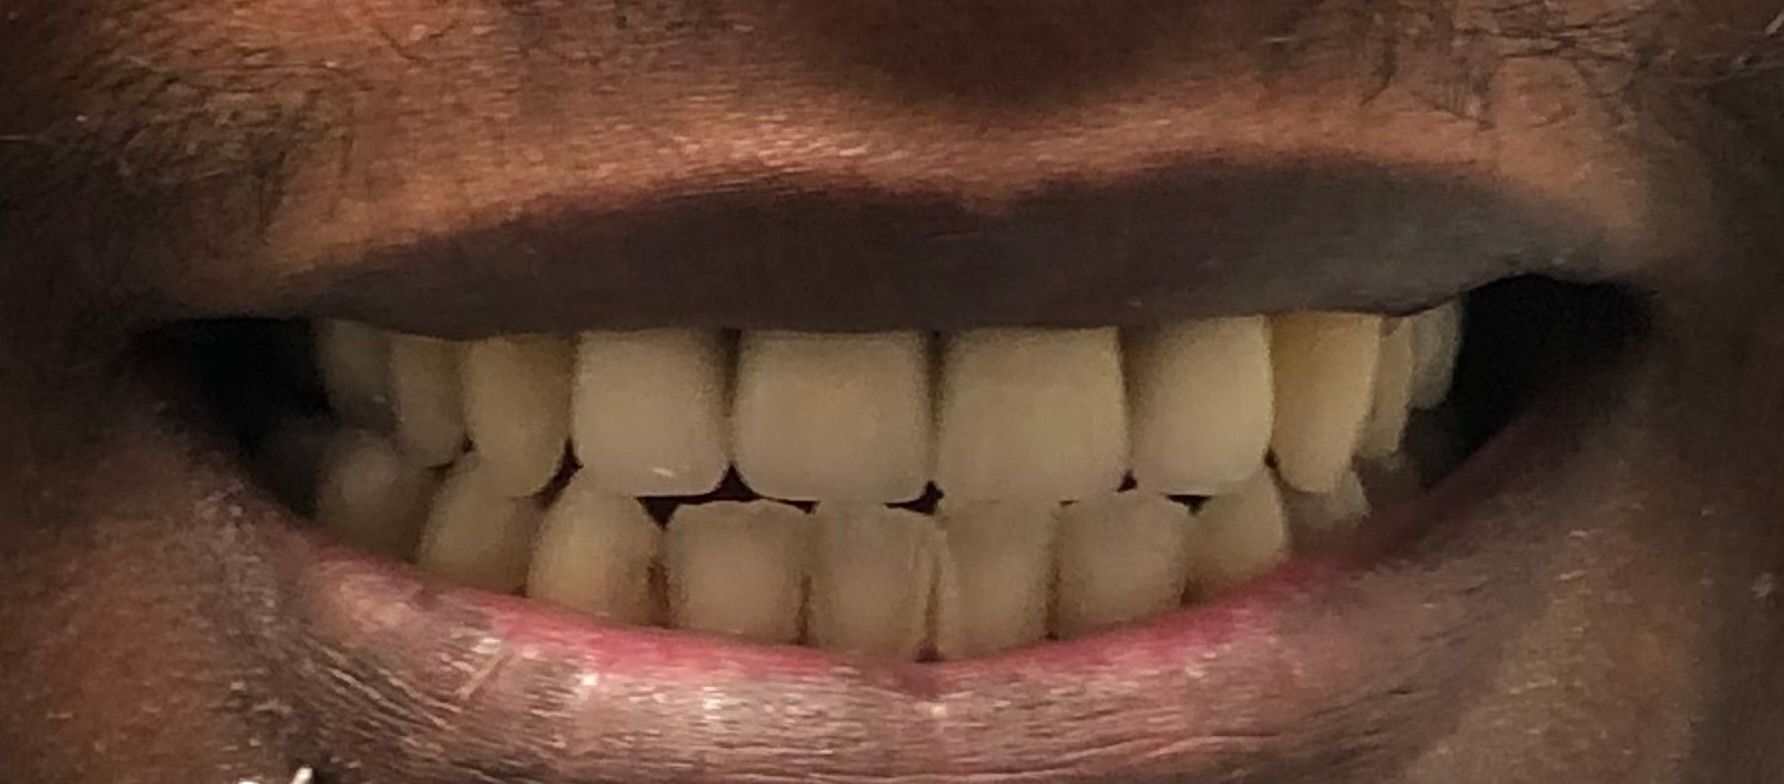 a close up of a person 's mouth showing their teeth | Anterior Crowns | Front Crowns | Full mouth restoration | Smile Makeover | Before and After Dental Treatment | Barclay Family Dental | Best Dentist For Family Dentistry, Dental Implants, and Cosmetic Dentistry in Cherry Hill, NJ